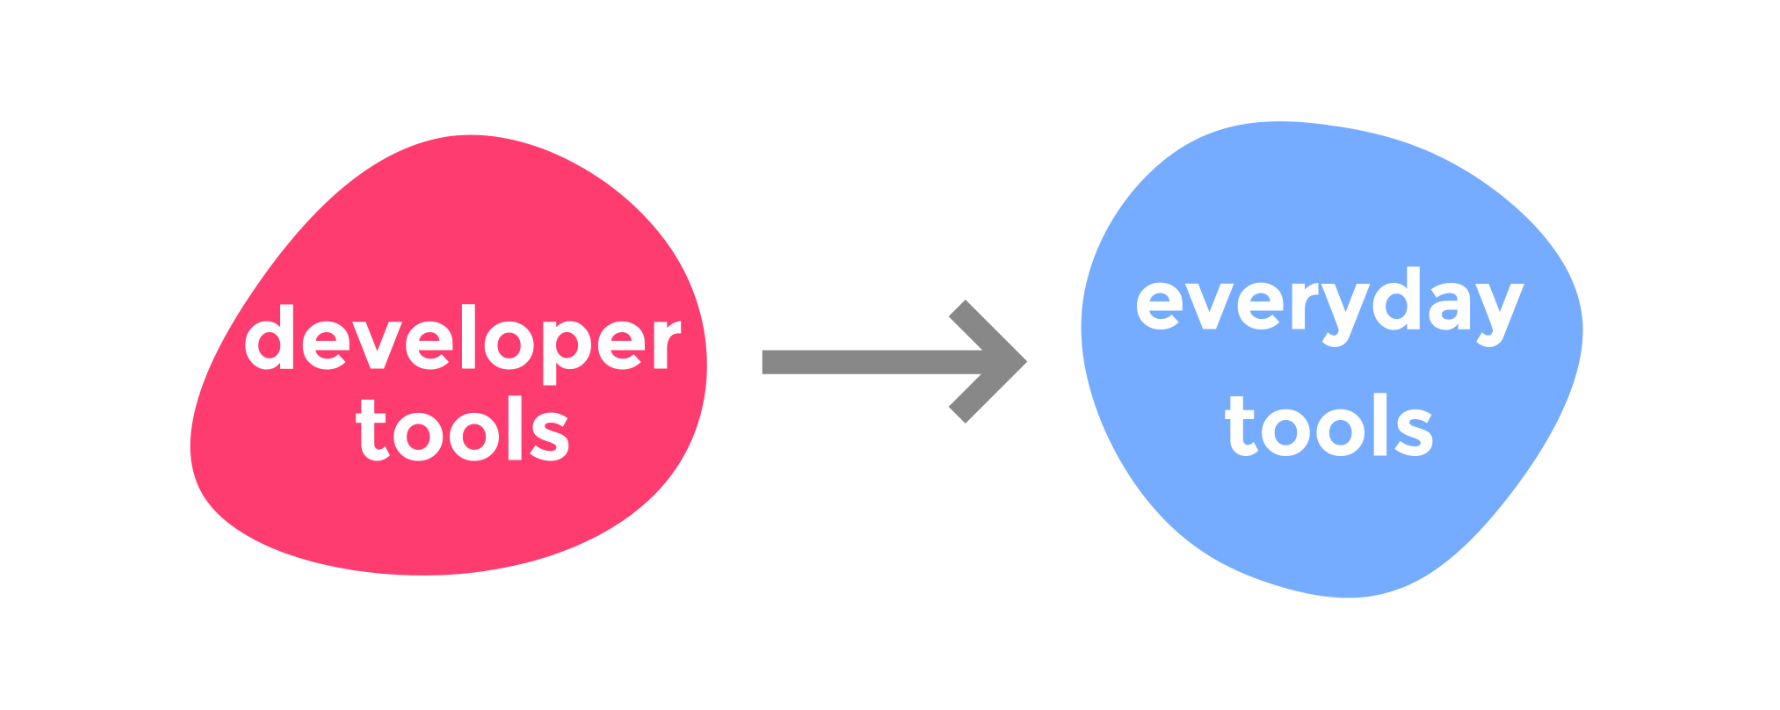 On the left, a pink blob titled ‘developer tools’ points via an arrow towards a blue blob on the right labelled ‘everyday tools.’